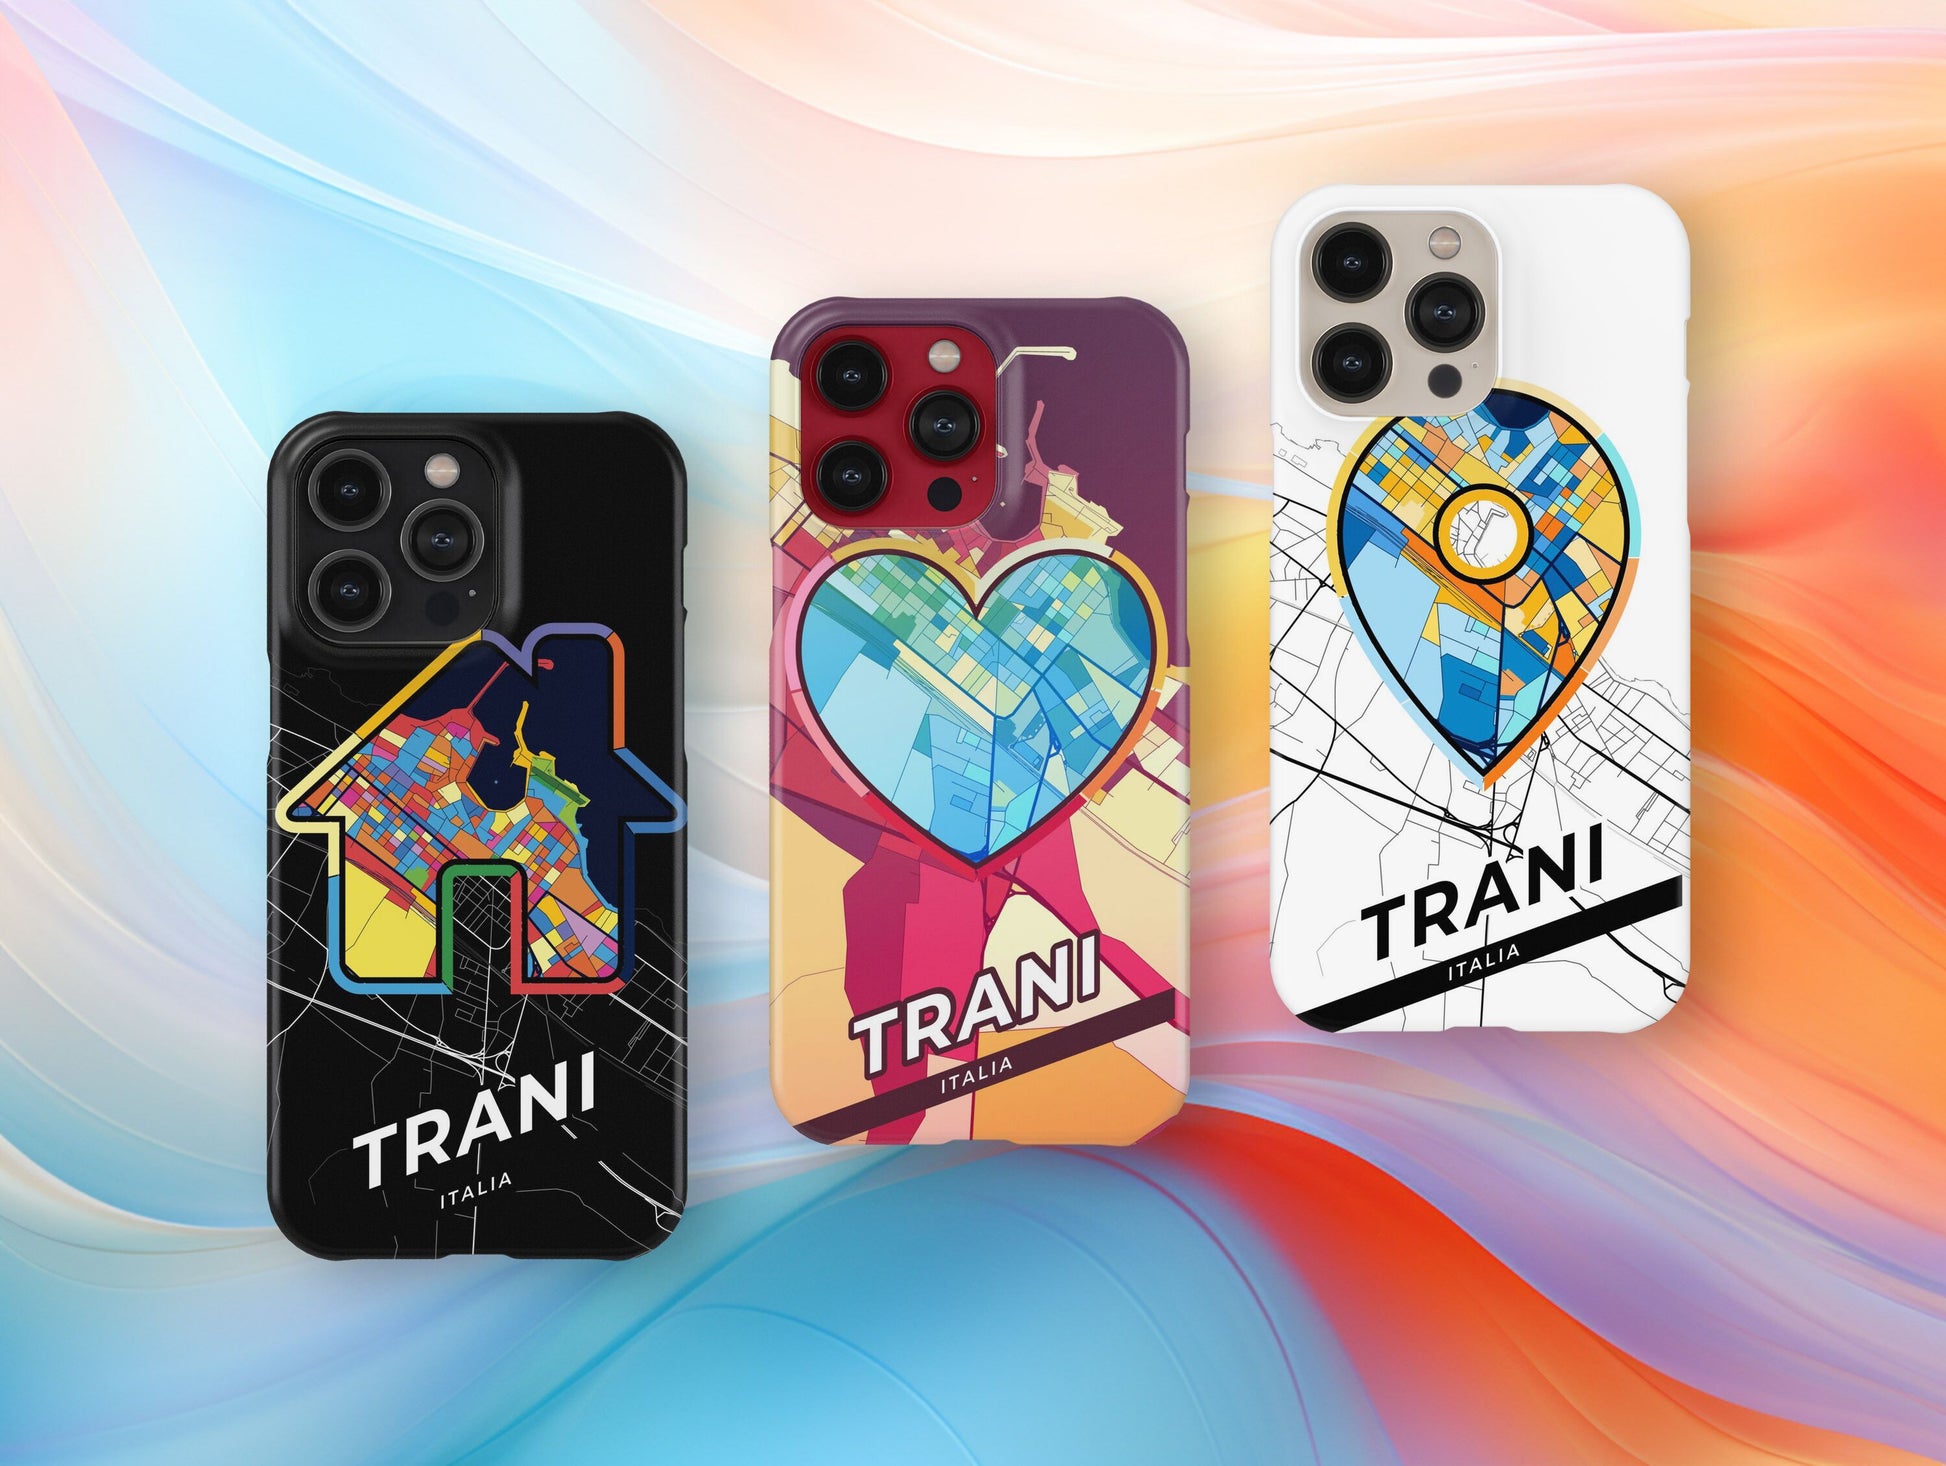 Trani Italy slim phone case with colorful icon